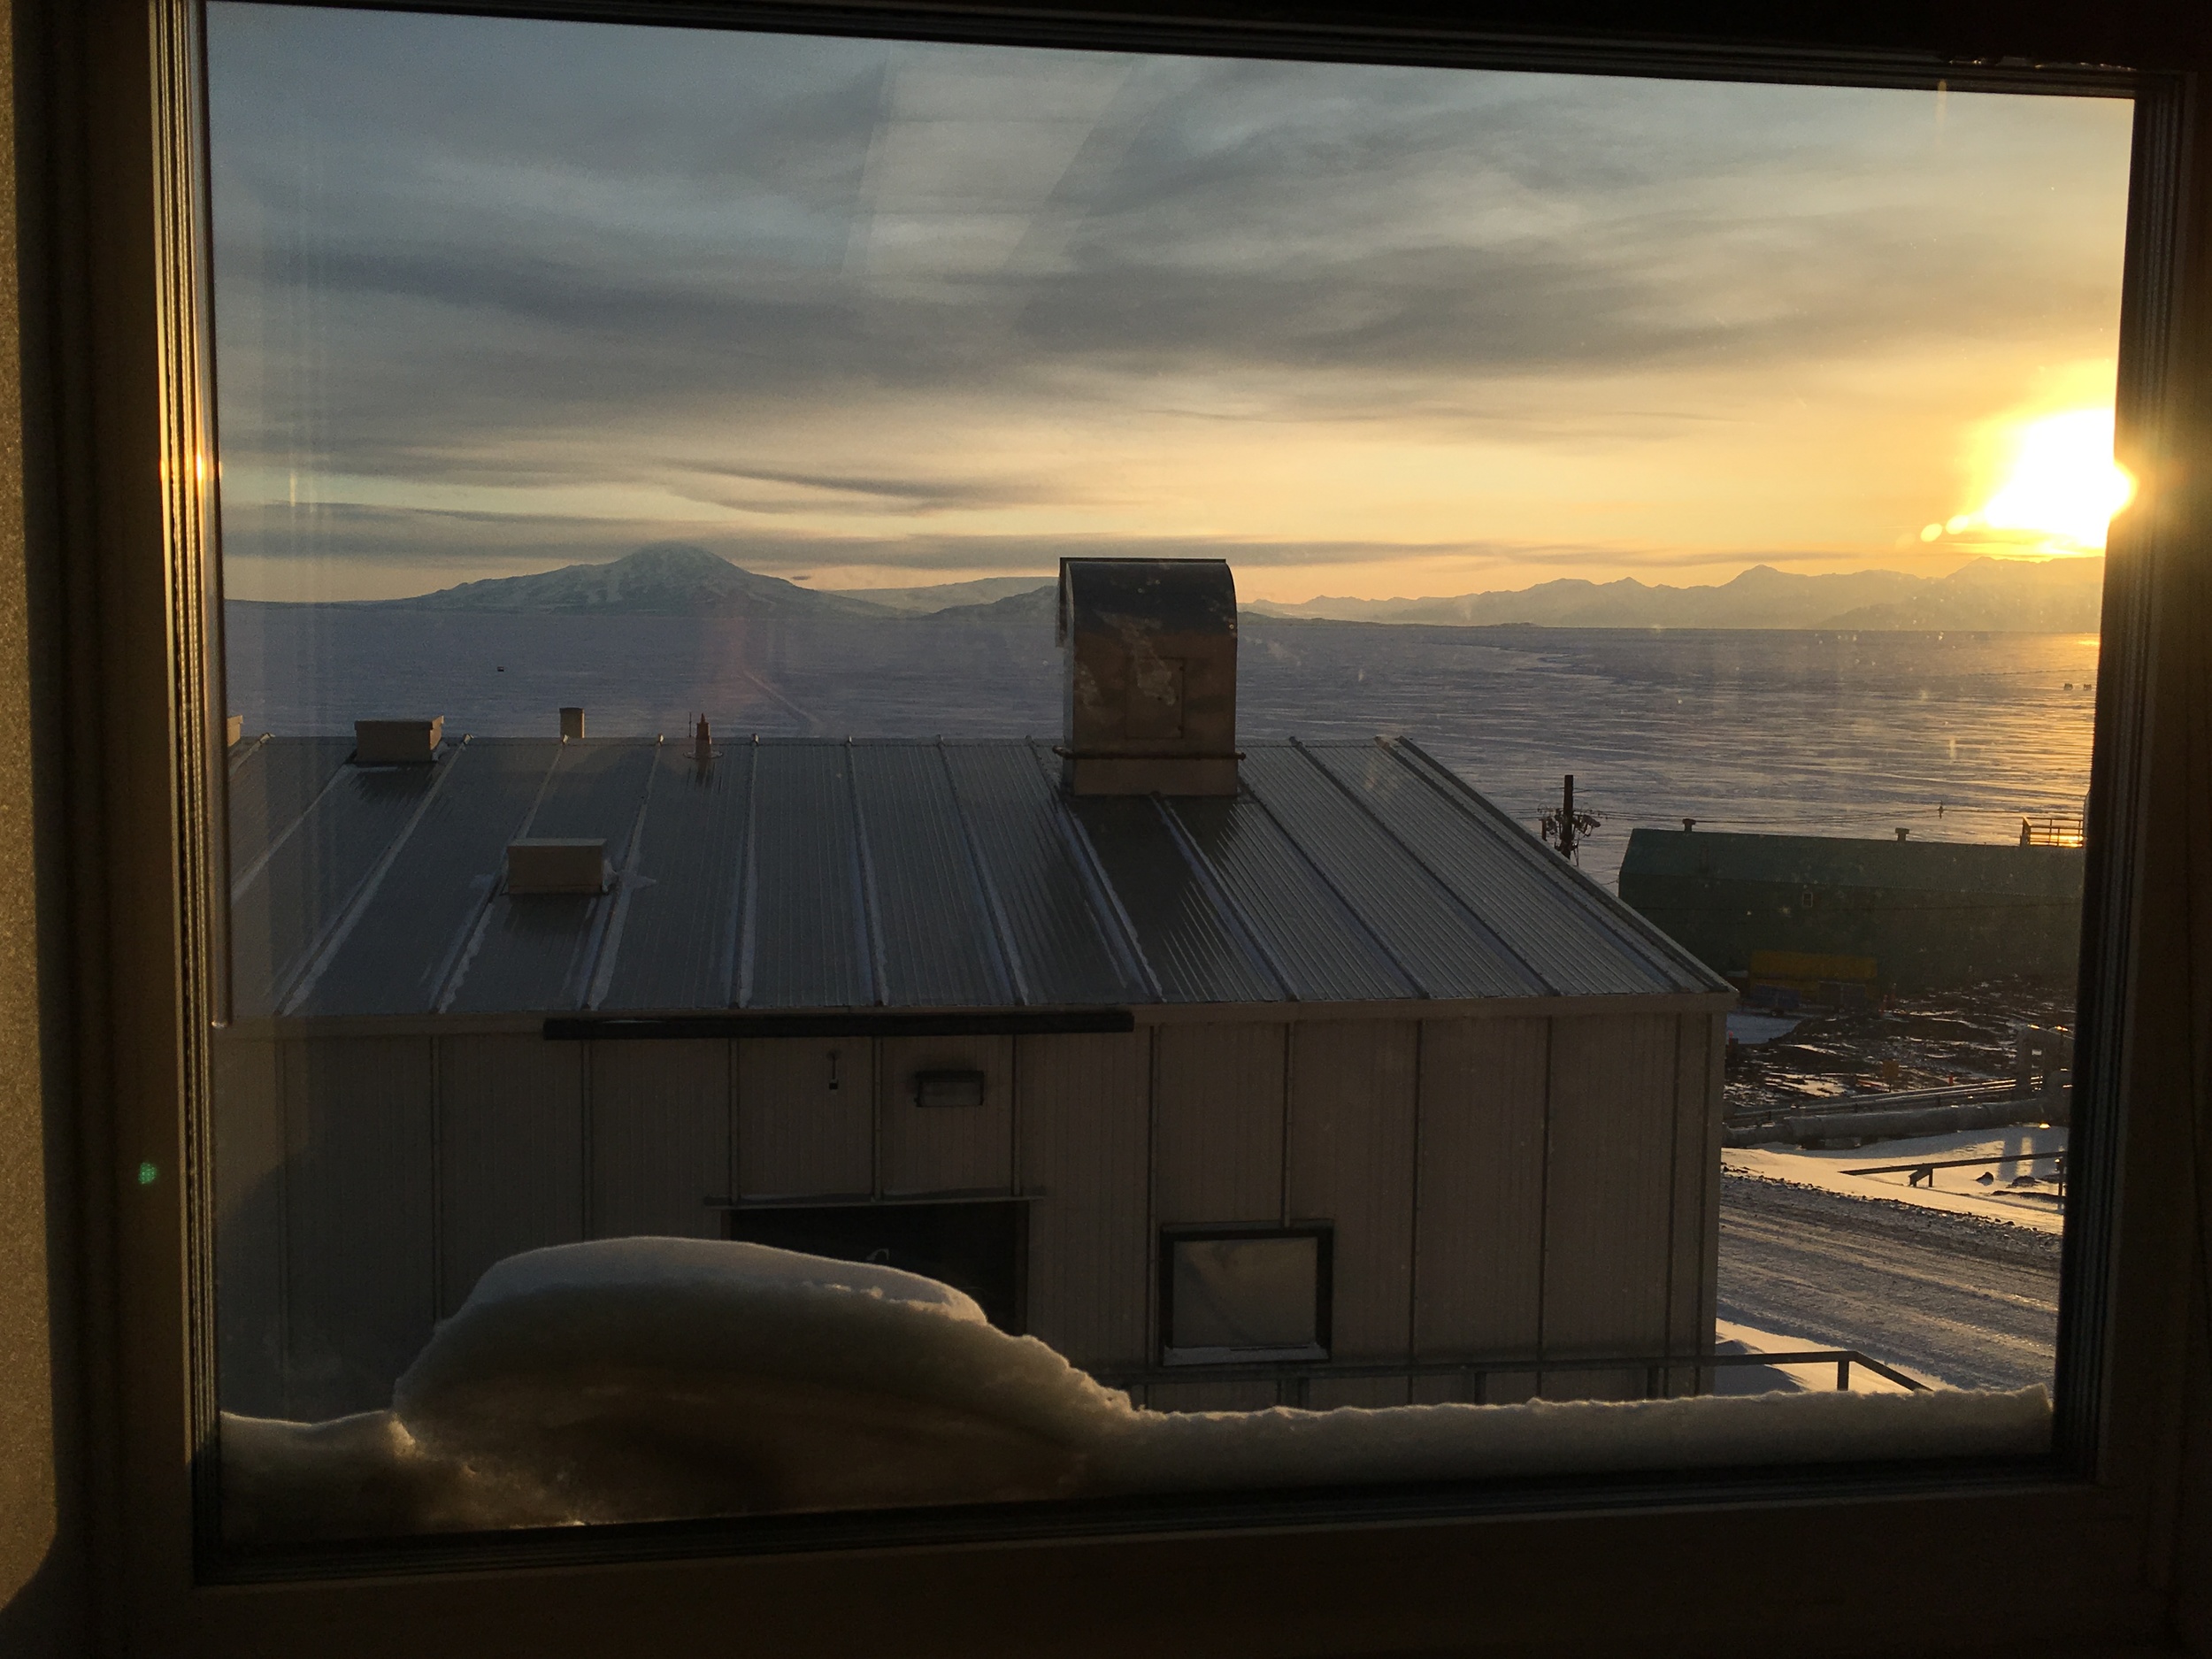  McMurdo Sound, Mt. Discovery, and the Royal Society Range viewed out the window of our lab in the Crary building.&nbsp; The last sunset of the year is on Saturday Oct. 24th at 1:09 AM, after which we will have 24-hour sunlight. 